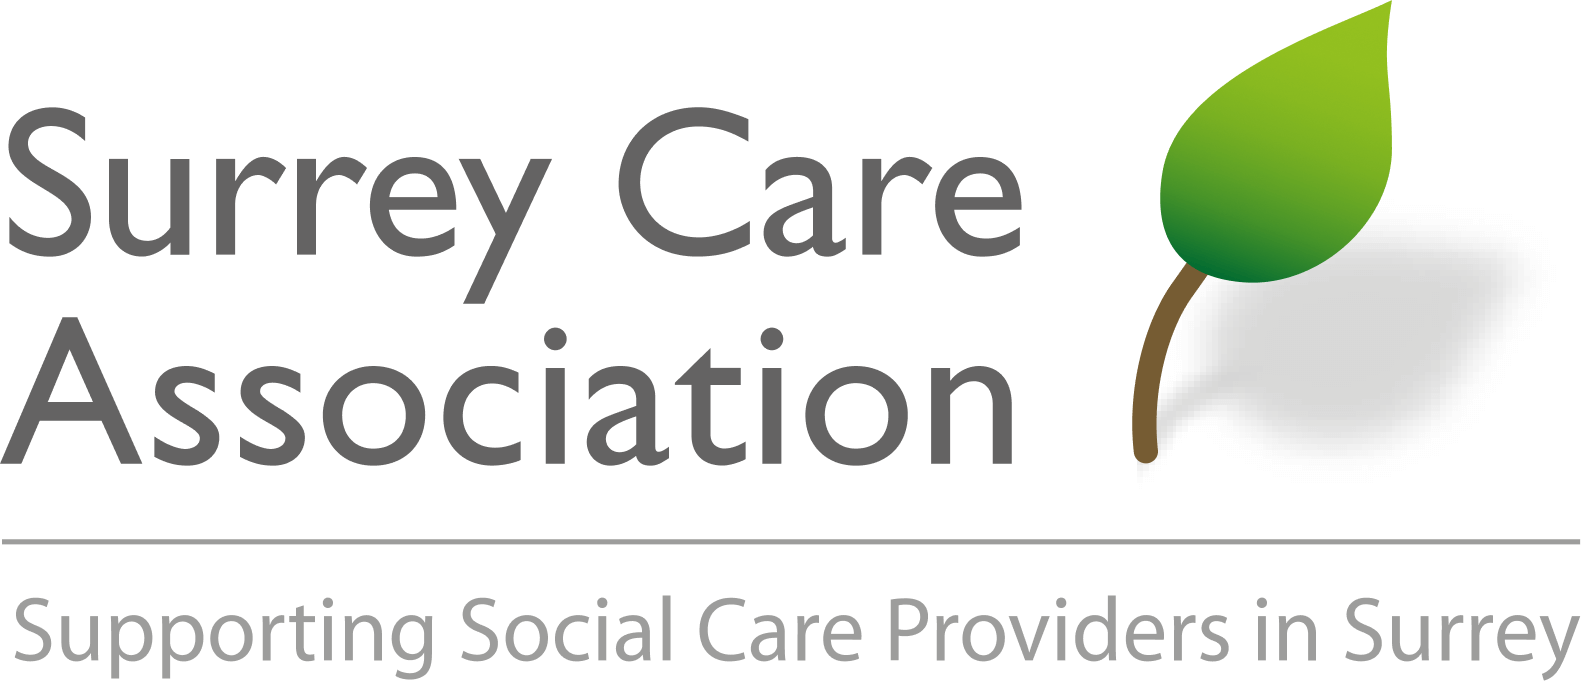 Surrey Care Association: Advice and Support for Care Providers and Care Seekers